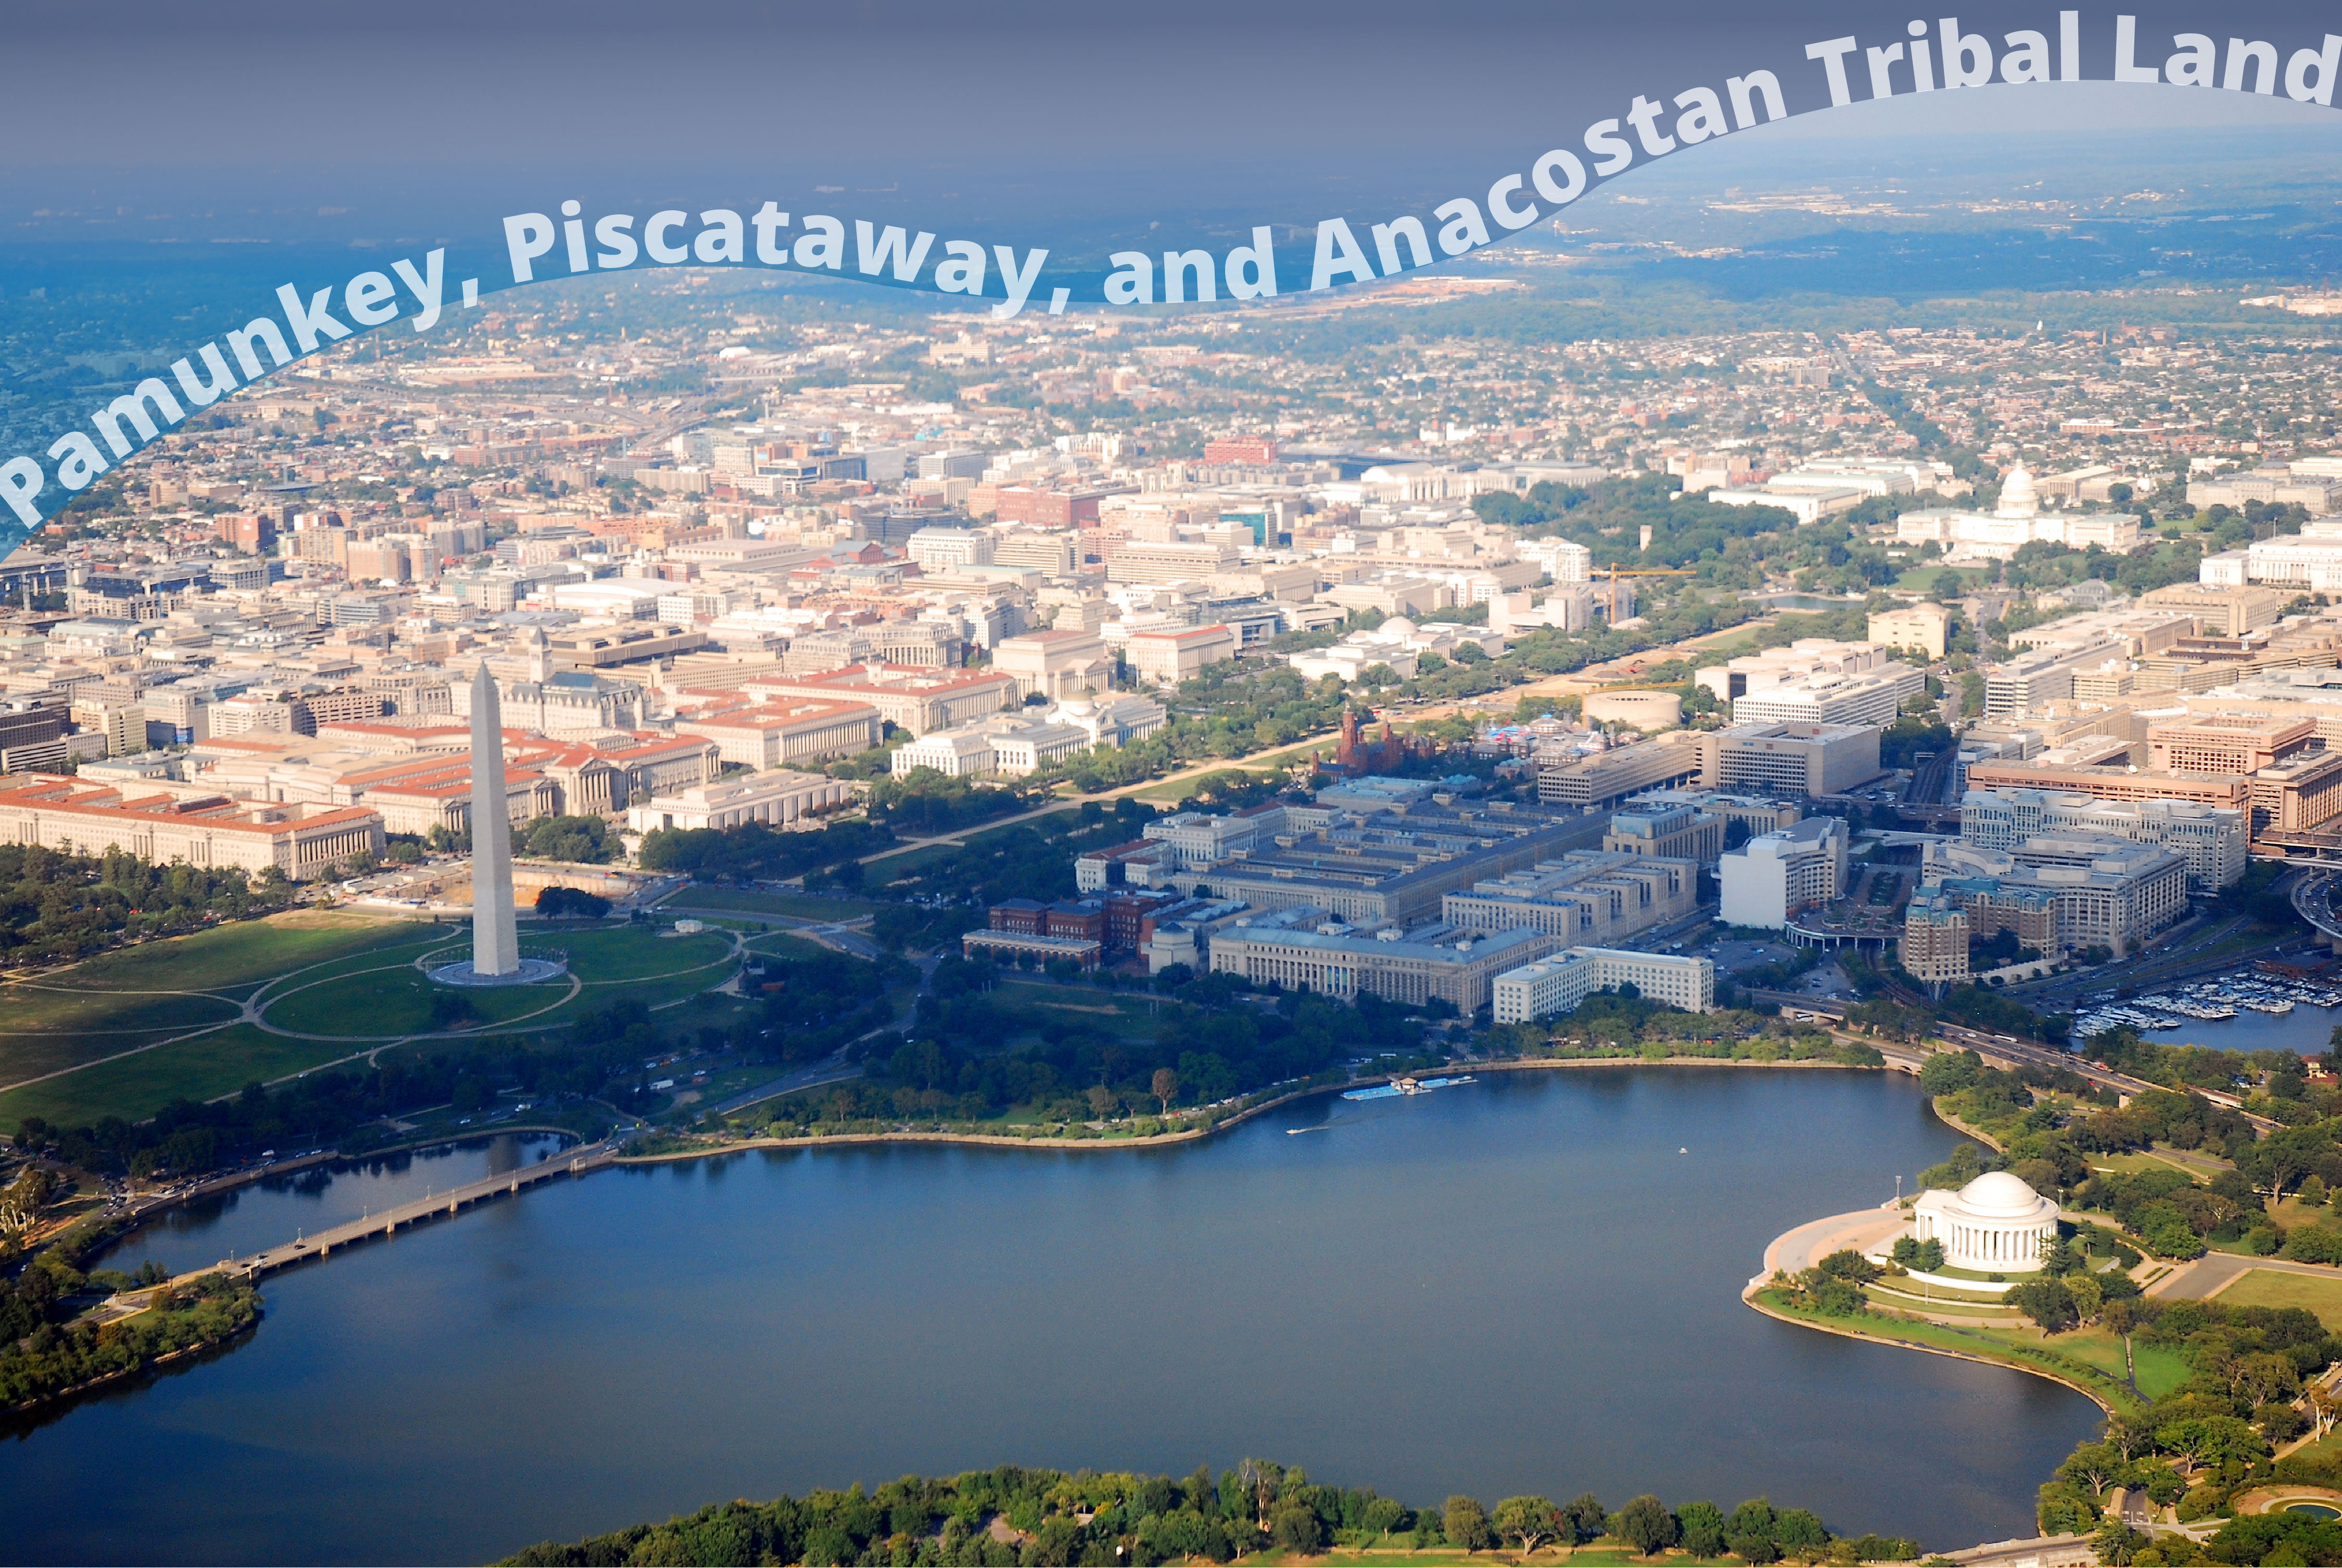 Aerial view of Washington D.C. with the words Paumunkey, Piscataway, and Anacostan Tribal Land superimposed